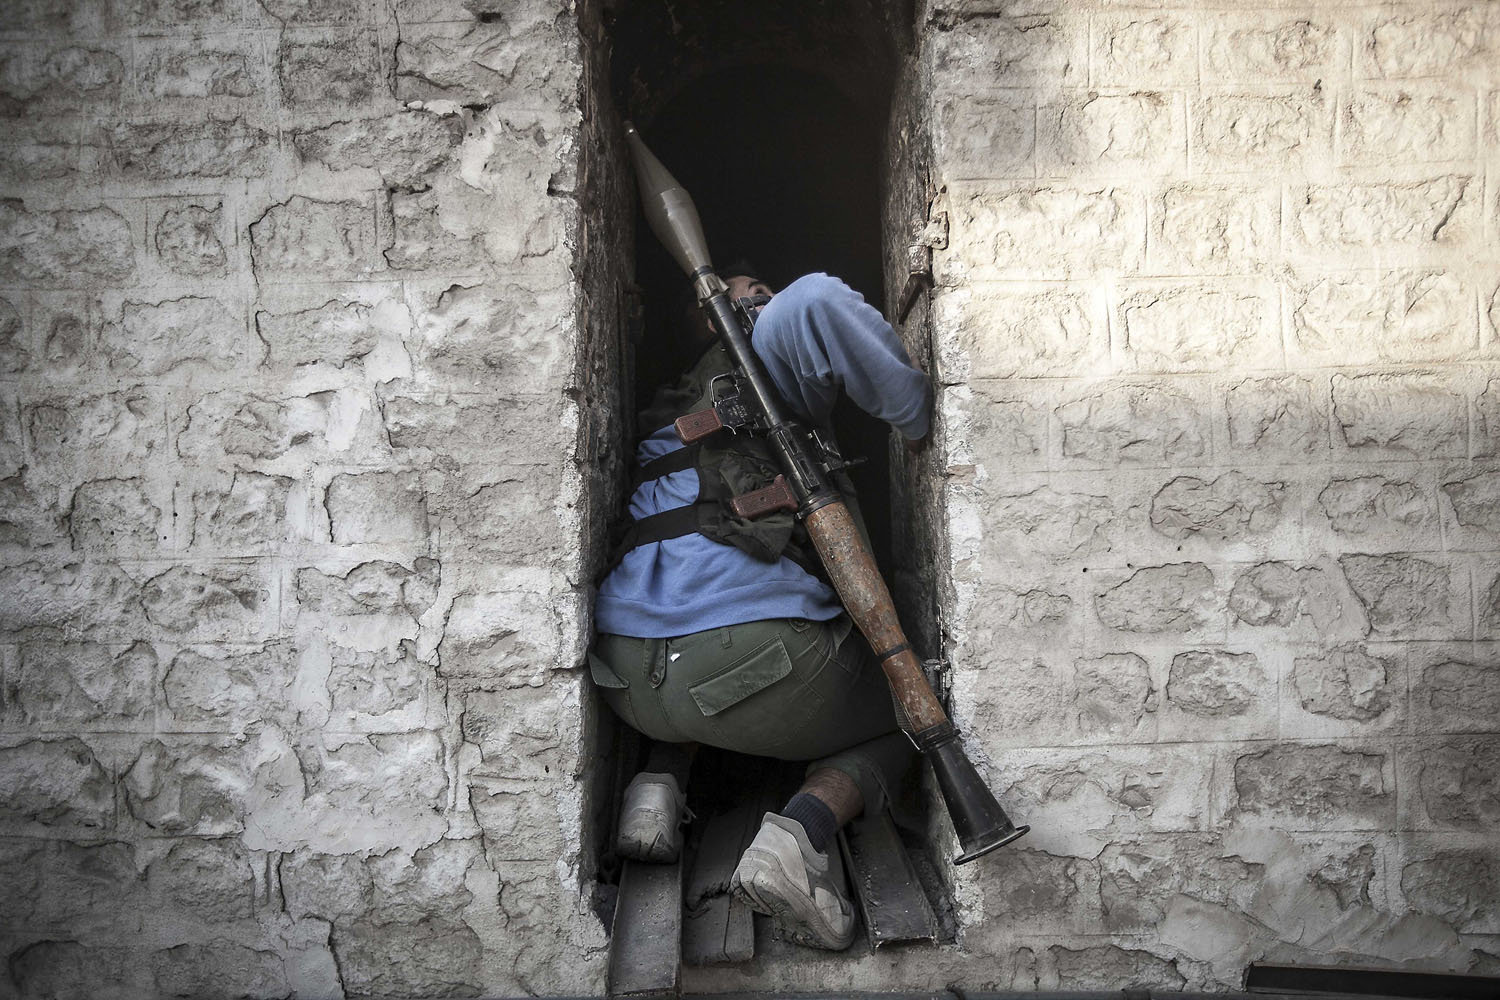 Image: Nov. 3, 2012. A rebel fighter takes cover as he looks up at a warplane attacking rebel positions during heavy clashes between rebel fighters and the Syrian army.